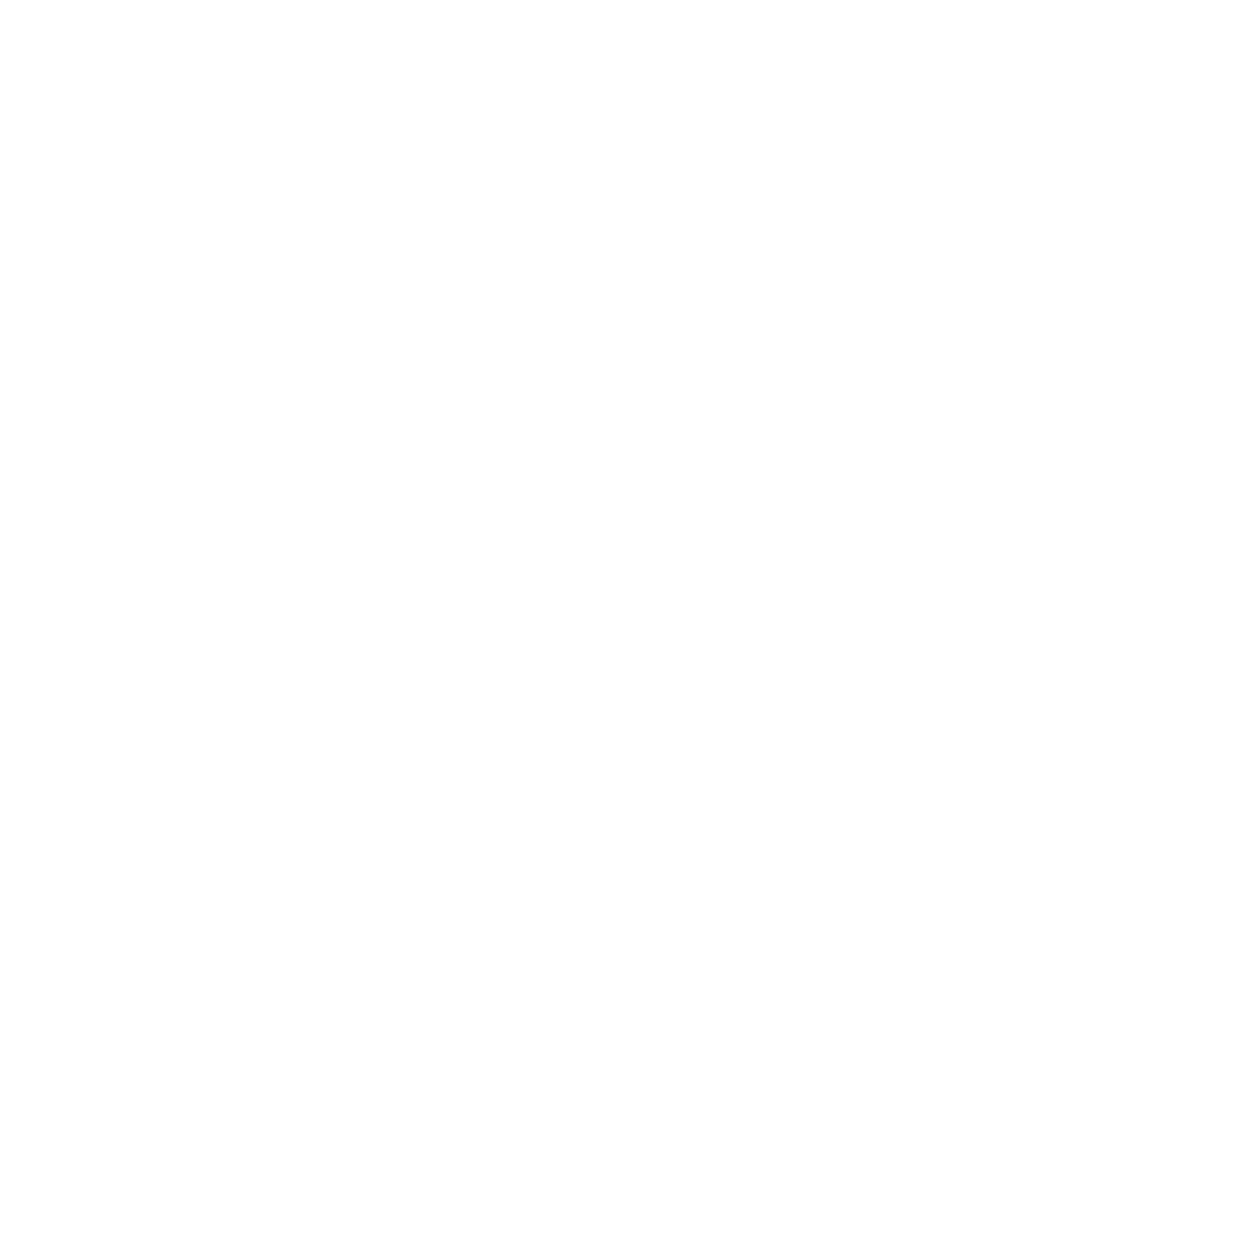 City Seal of the City and County of San Francisco